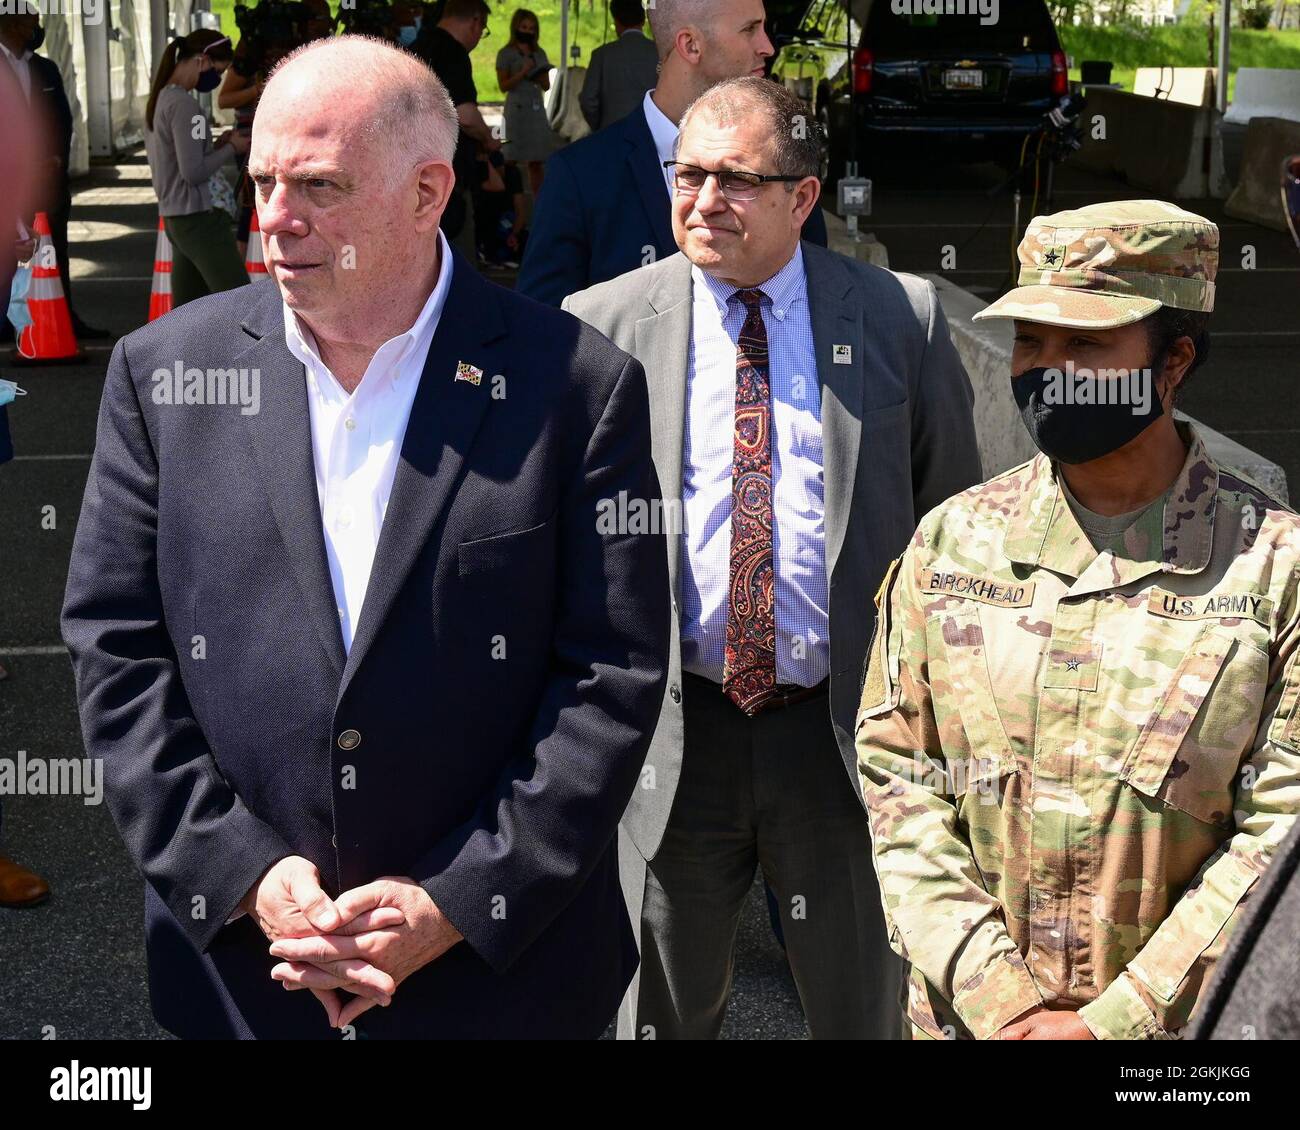 Maryland Governor Larry Hogan and U.S. Army Brig. Gen. Janeen Birckhead, commander of the Maryland Army National Guard tour the Ripken Stadium vaccination site on May 5, 2021, in Aberdeen, Maryland. Birckhead leads the Vaccine Equity Task Force, an initiative to promote equitable access to the COVID-19 vaccine throughout Maryland. Stock Photo